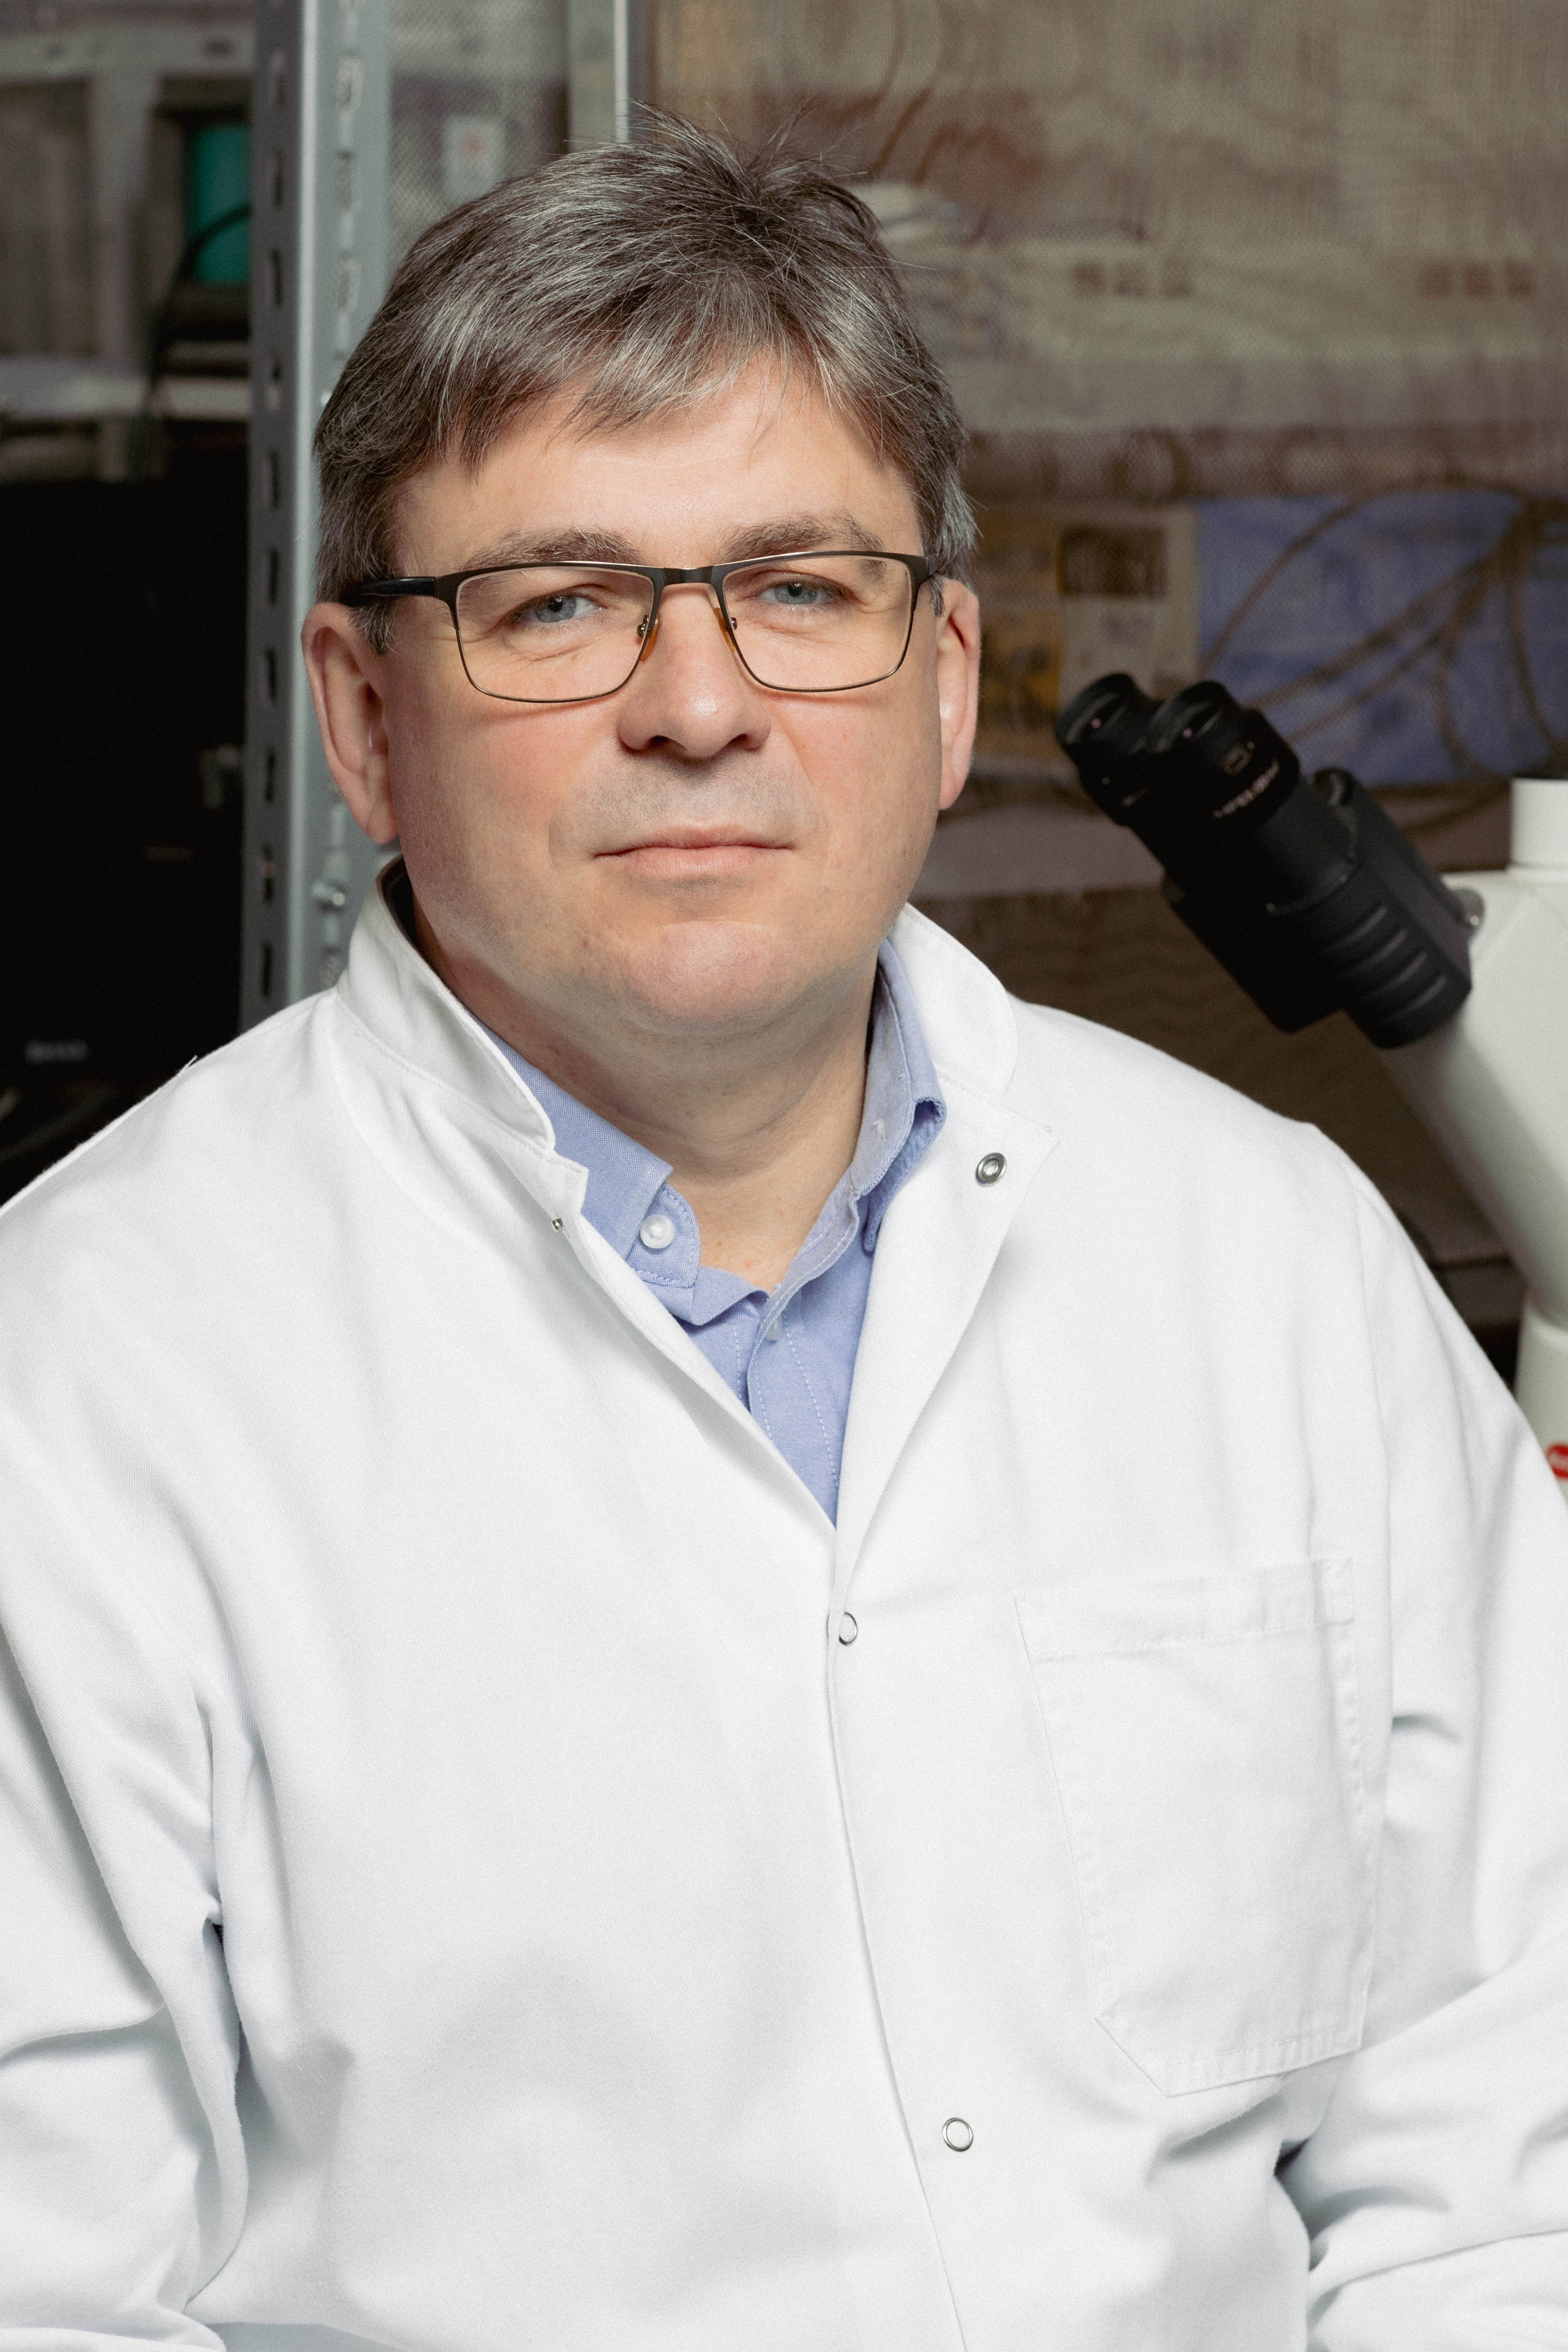 The professorship gives Vladimir Matchkov an opportunity to establish new collaborations both in Denmark and abroad. He considers his new title as a big pat on the back and looks forward to further developing a strong research school within circulatory physiology at Aarhus University and to training a new generation of researchers.